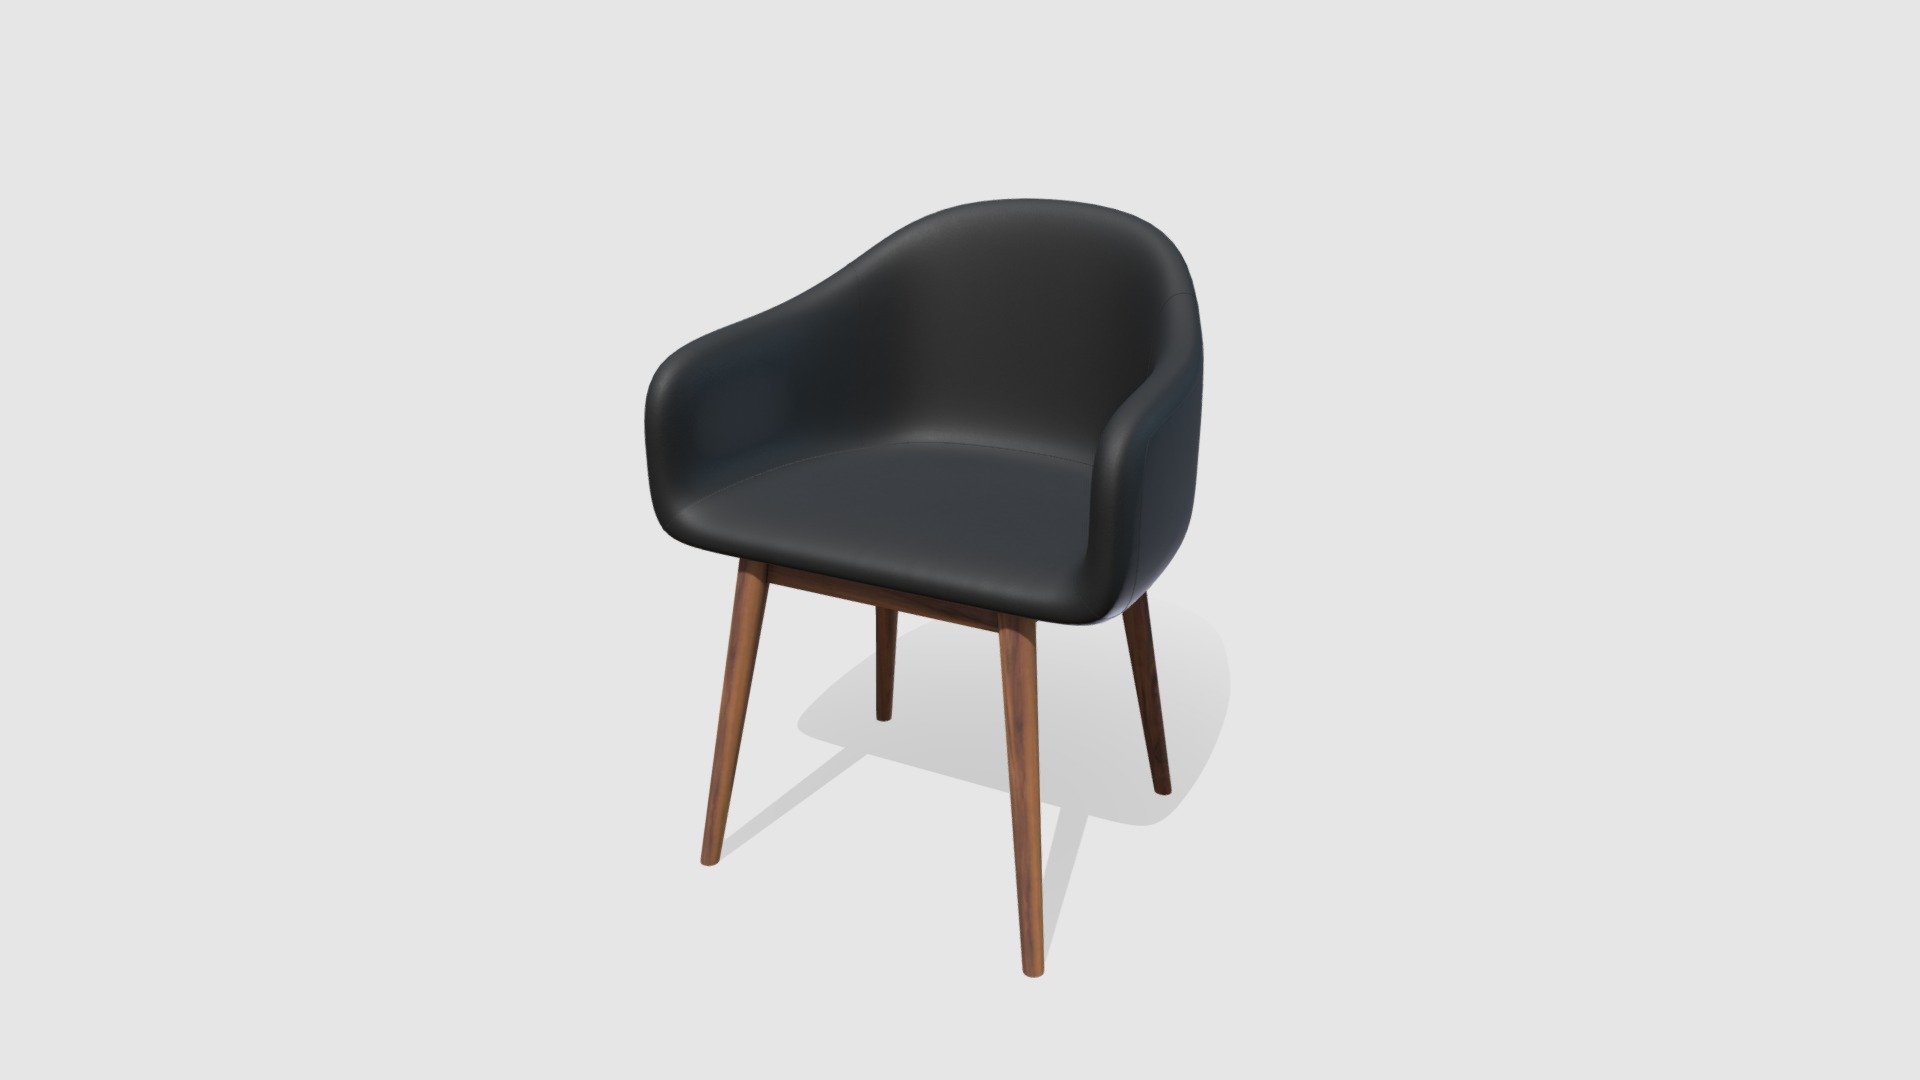 3D model Black leather loft chair - This is a 3D model of the Black leather loft chair. The 3D model is about a black chair with a cushion.